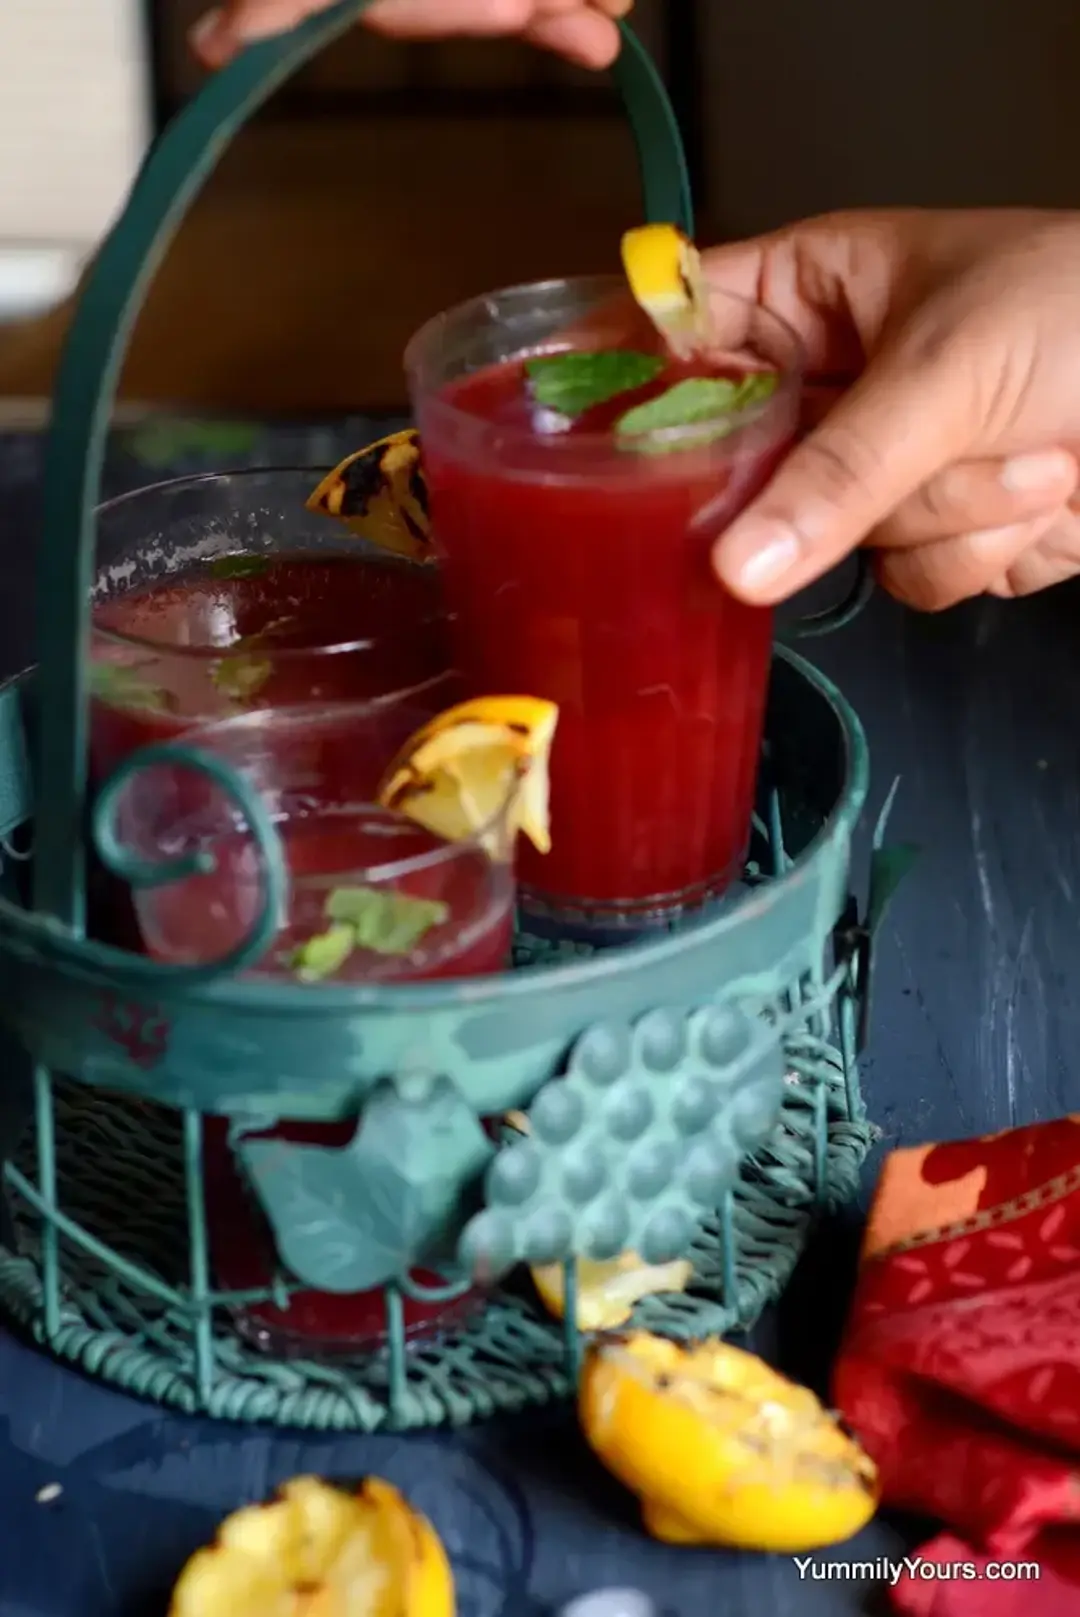 A hand picking up a glass of plum juice from a round drink tray, surrounded by pieces of lemons